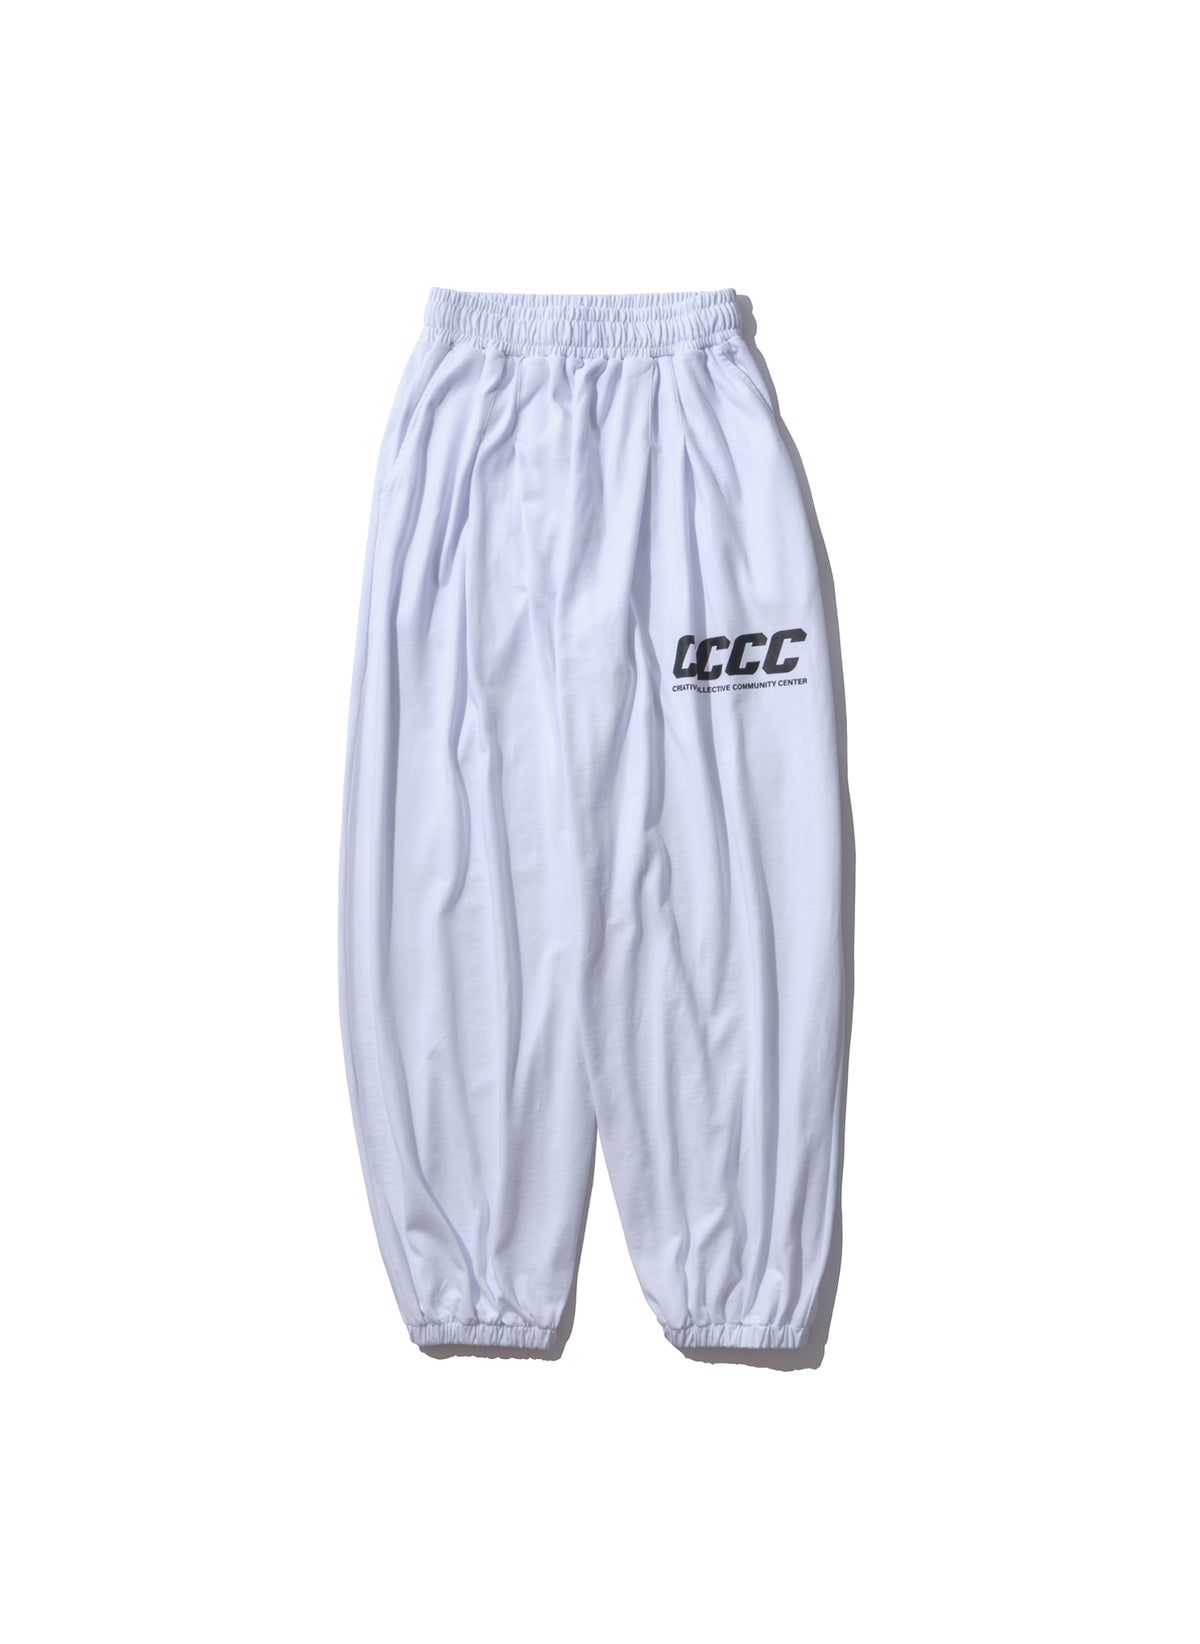 <span style="color: #f50b0b;">Last One</span> WILLY CHAVARRIA / CCCC GODZILLA PANTS WILLY WHITE